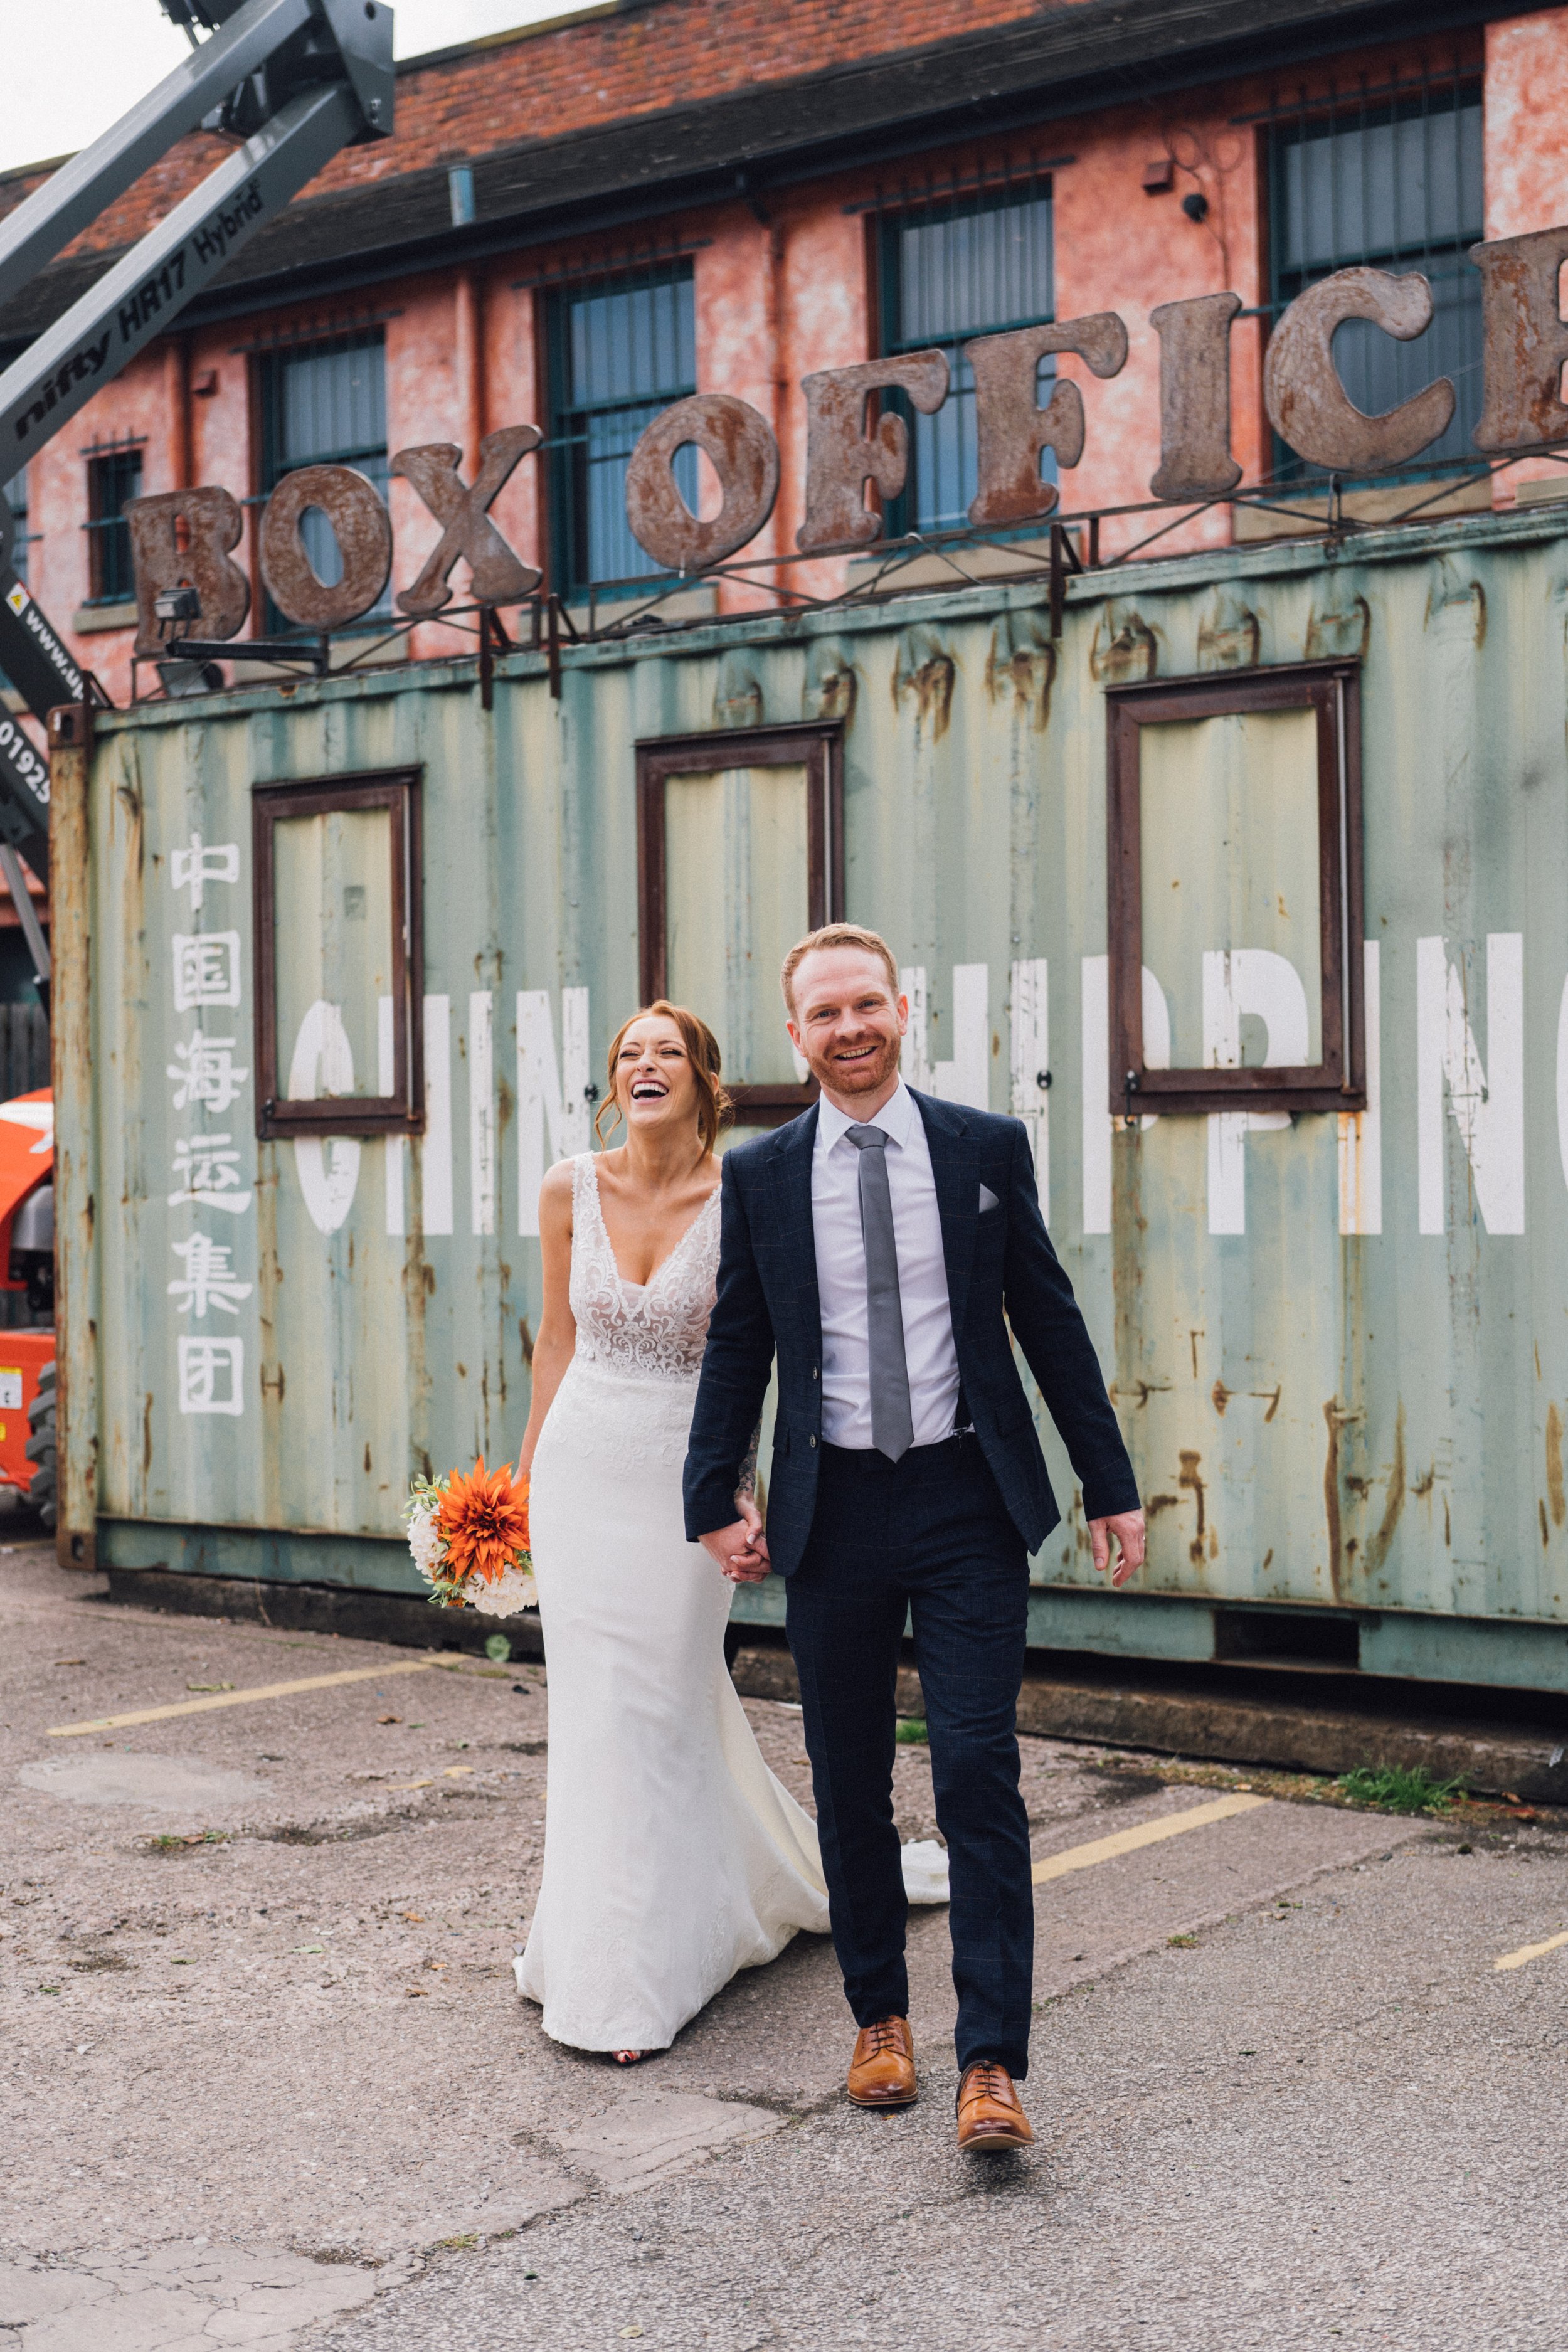  Photographer Credit: Alexandra Holt Photography  Bride and groom are stood outside the Victoria Warehouse wedding venue in front of the old BOX OFFICE. The rusty looking sign above the green shipping container looks very cool, and is a lovely contra